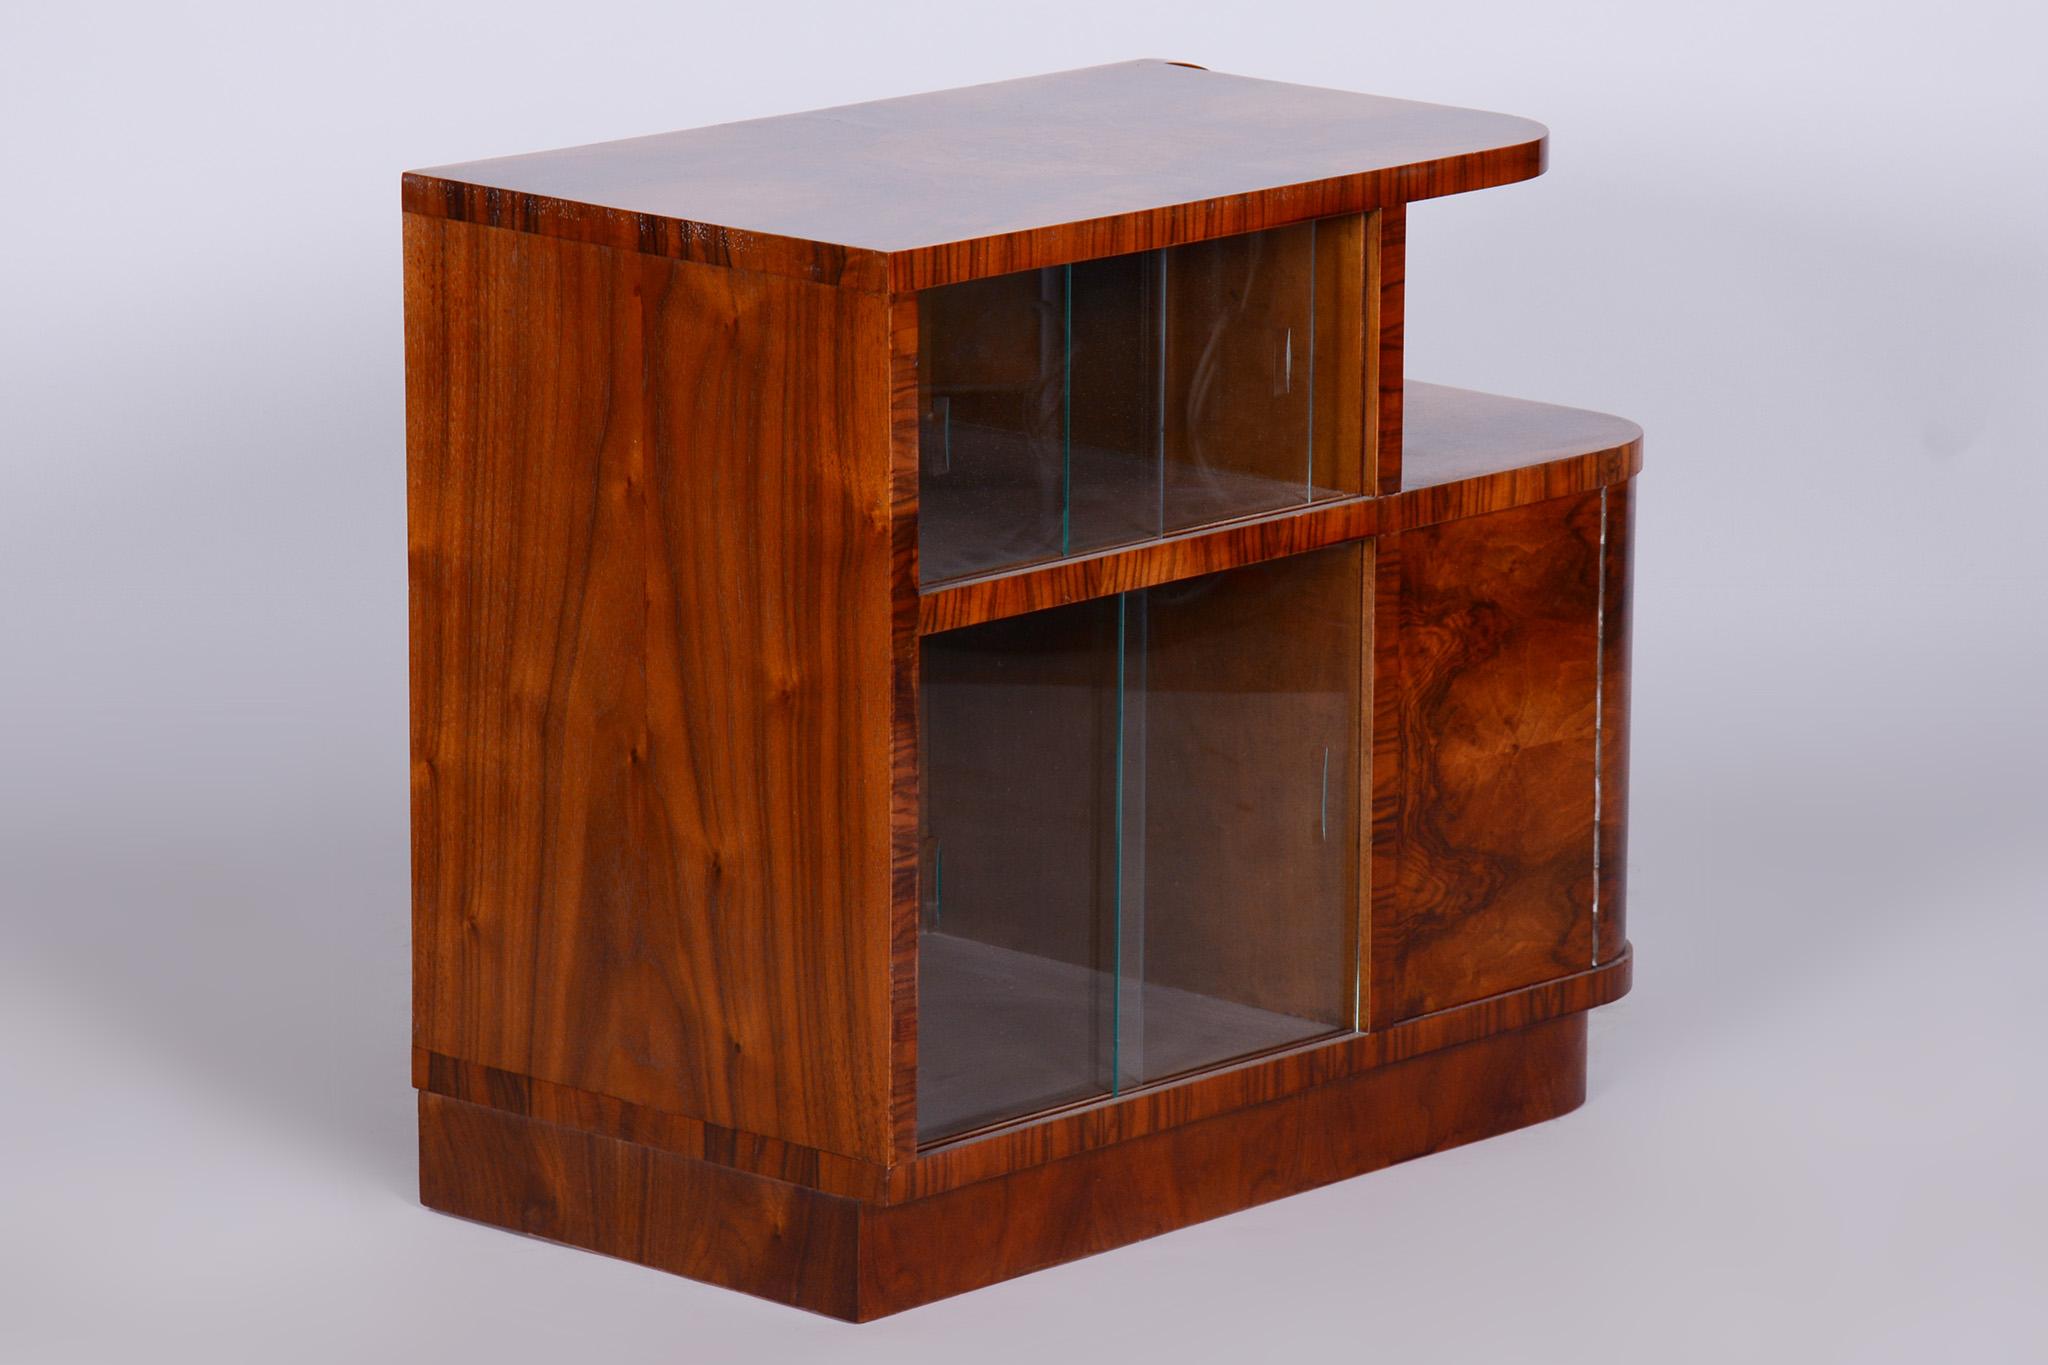 Small Art Deco Walnut Cabinet, Well-Preserved Original Condition, Czechia, 1930s In Good Condition For Sale In Horomerice, CZ